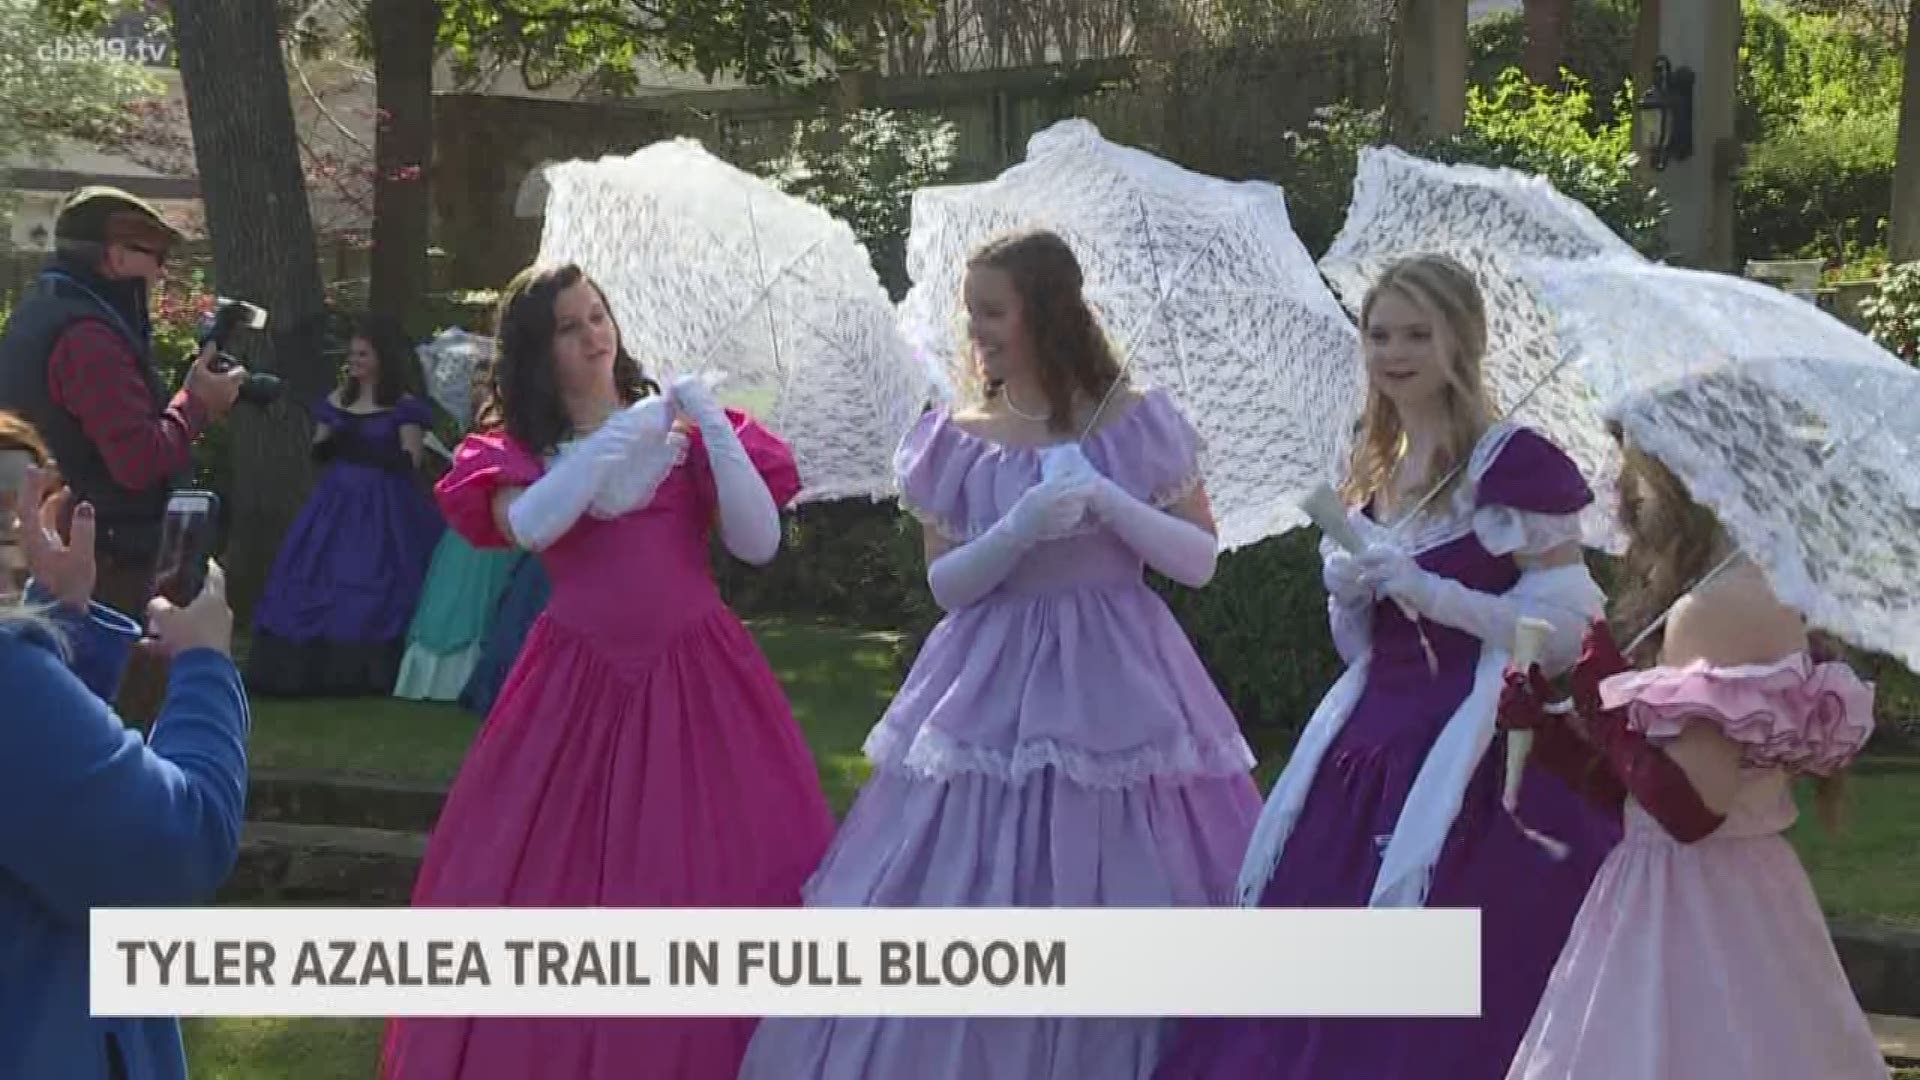 A ceremony was held for the 60th Annual Azalea and Spring Flower Trail to showoff the flowers and the belles.